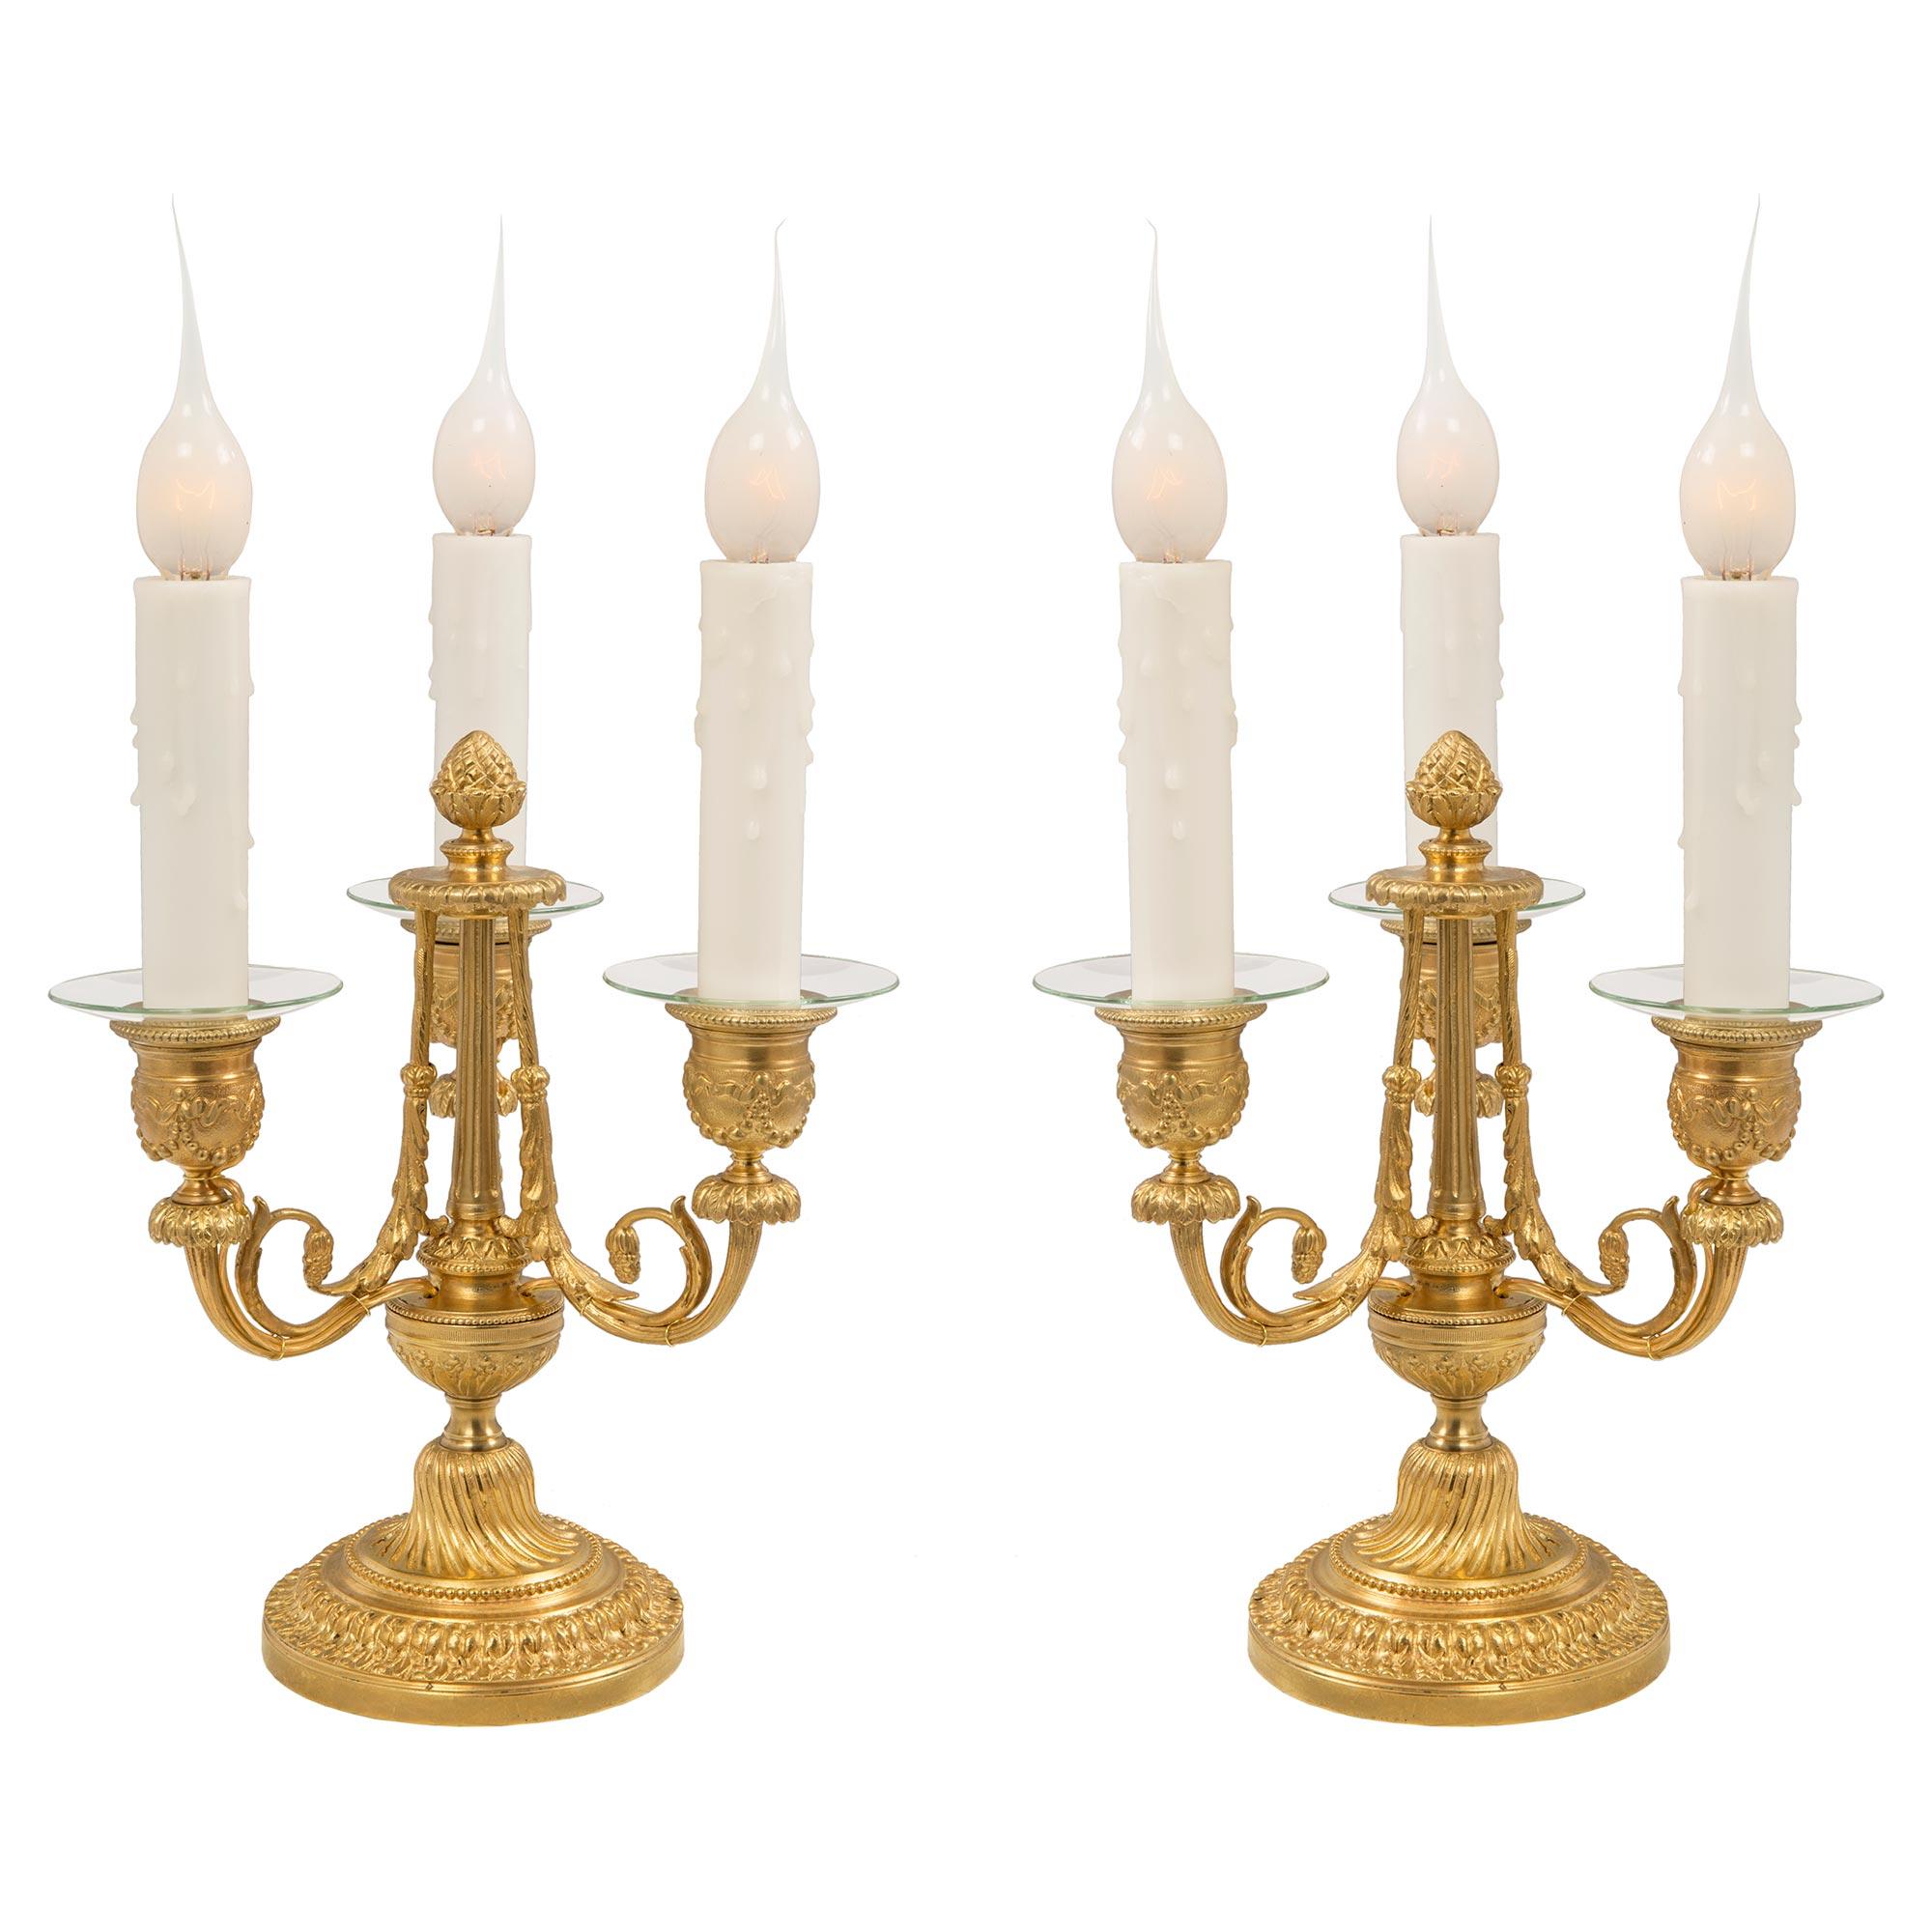 An elegant pair of French 19th century Louis XVI st. ormolu three arm candelabra lamps. Each lamp is raised by a circular stepped base with a lovely wrap around foliate band and beaded design. Above the spiral fluted socle pedestal is a fine berried